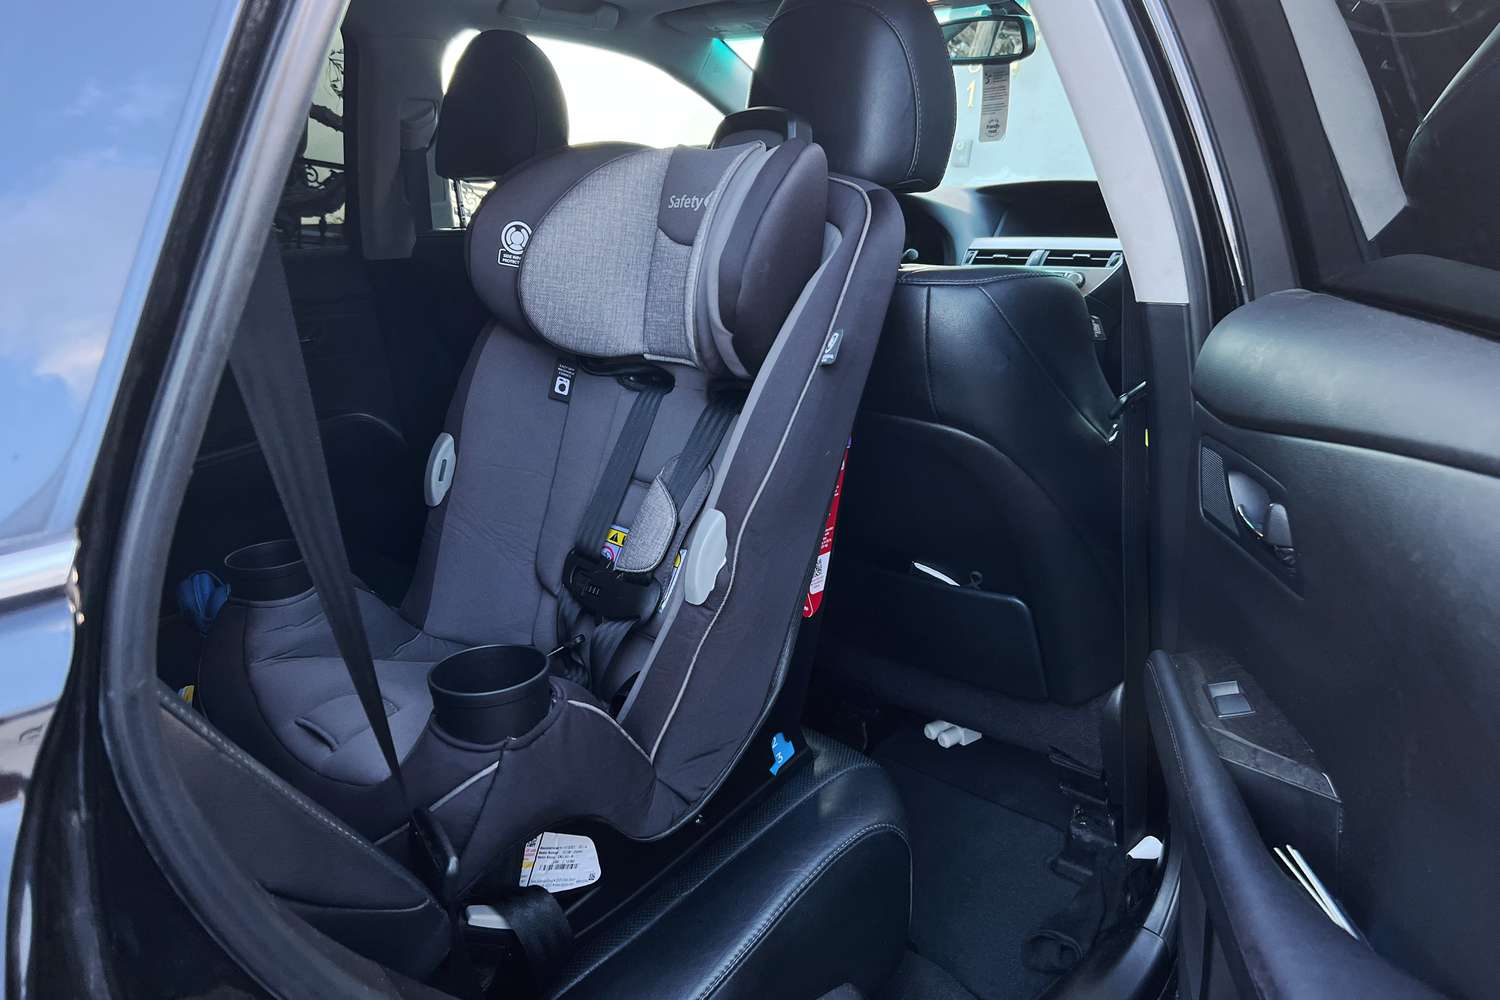 Safety 1st Grow and Go All-in-One Convertible Car Seat secured in car